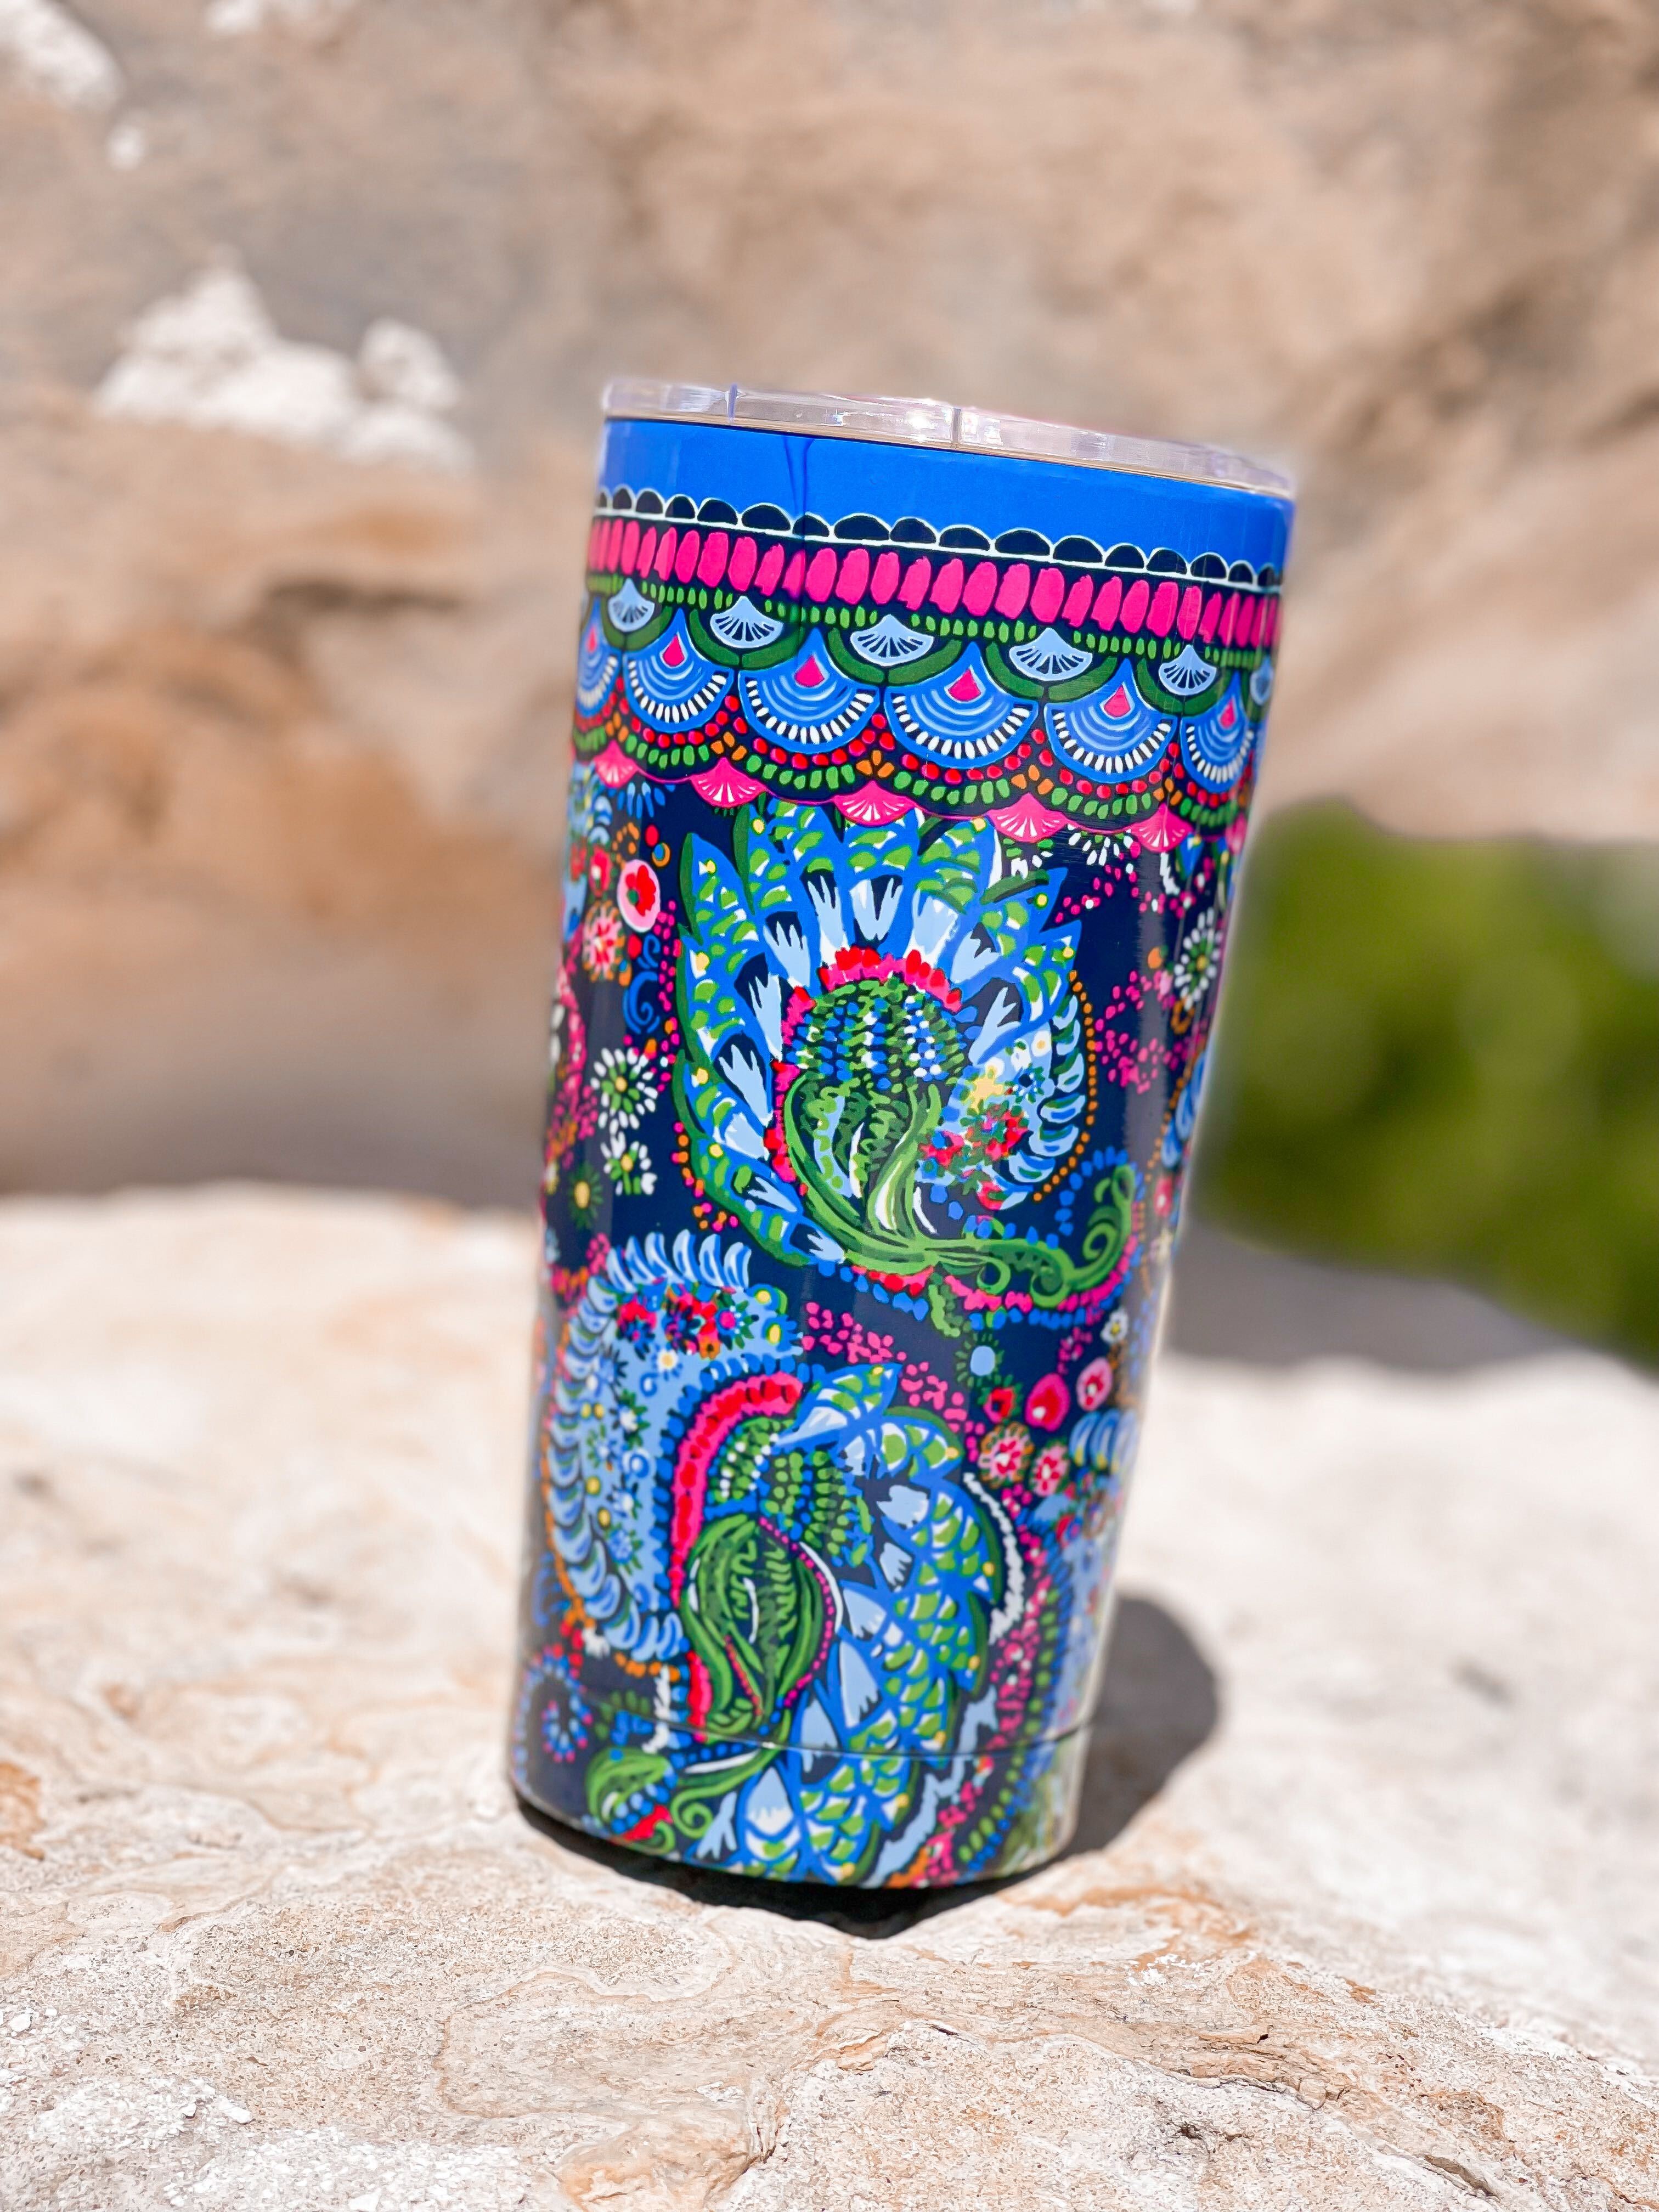 Stainless Steel Thermal Mug by Lilly Pulitzer - Take Me To The Sea